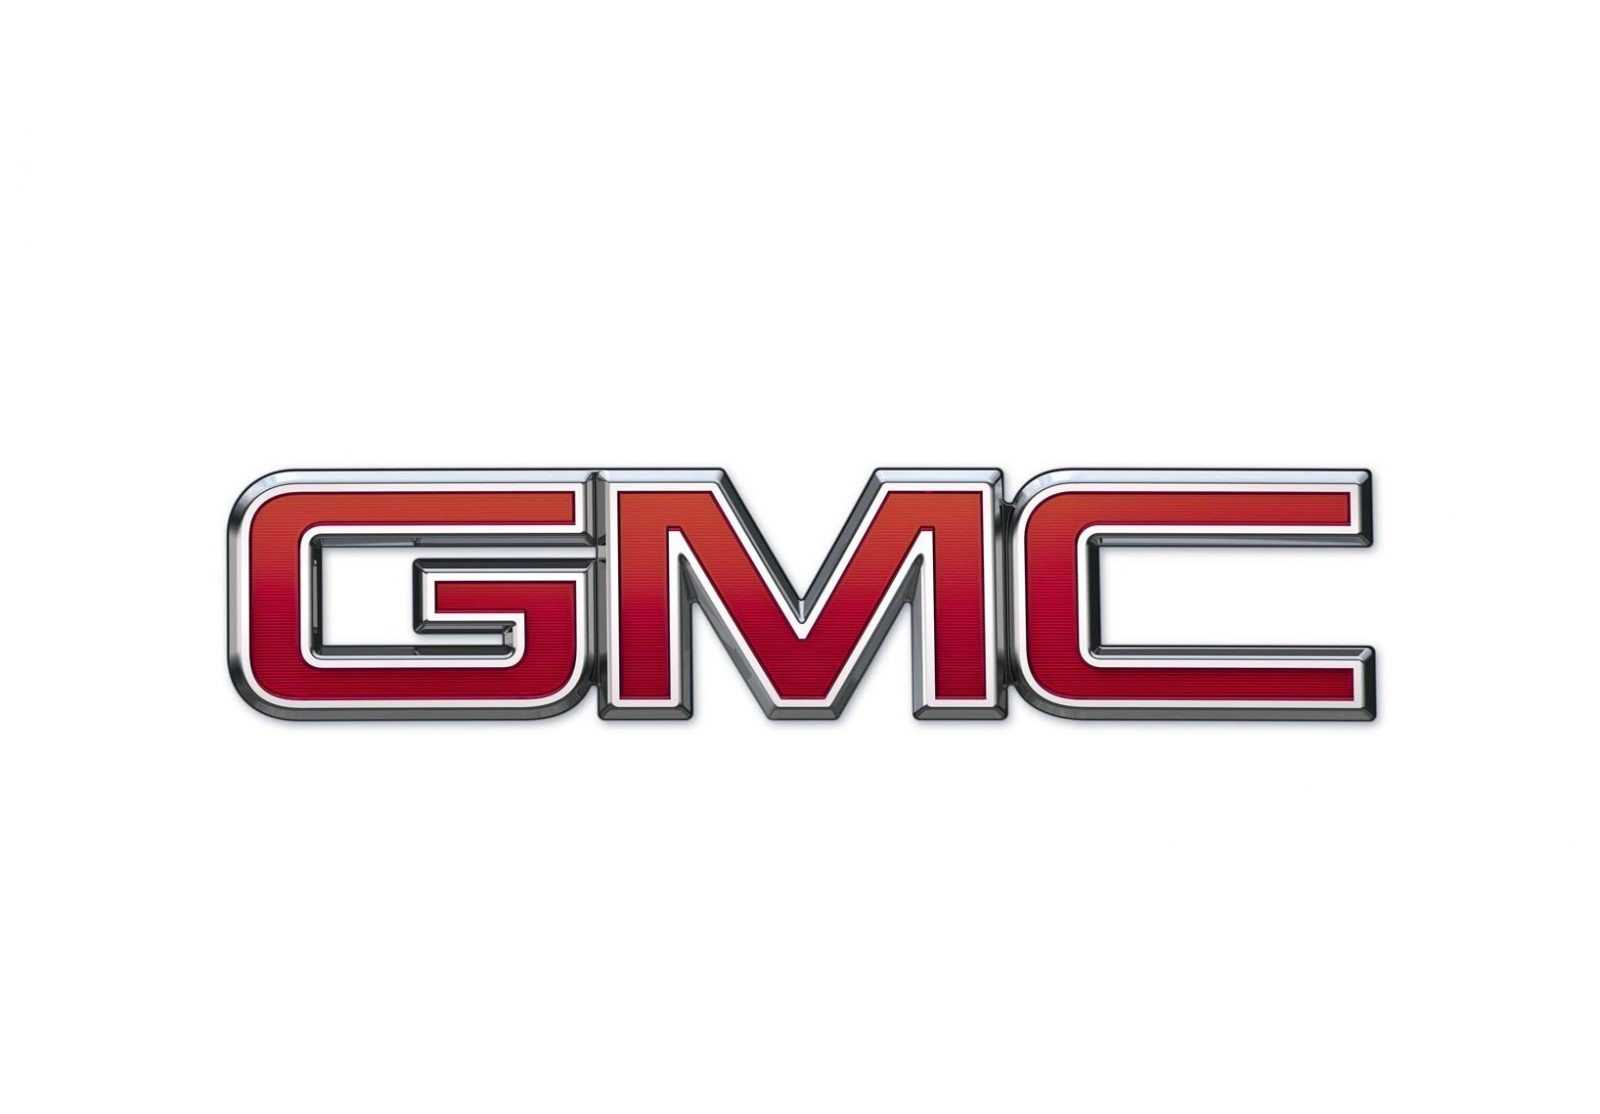 Pre-Owned GMC Cars for Sale in St. Charles